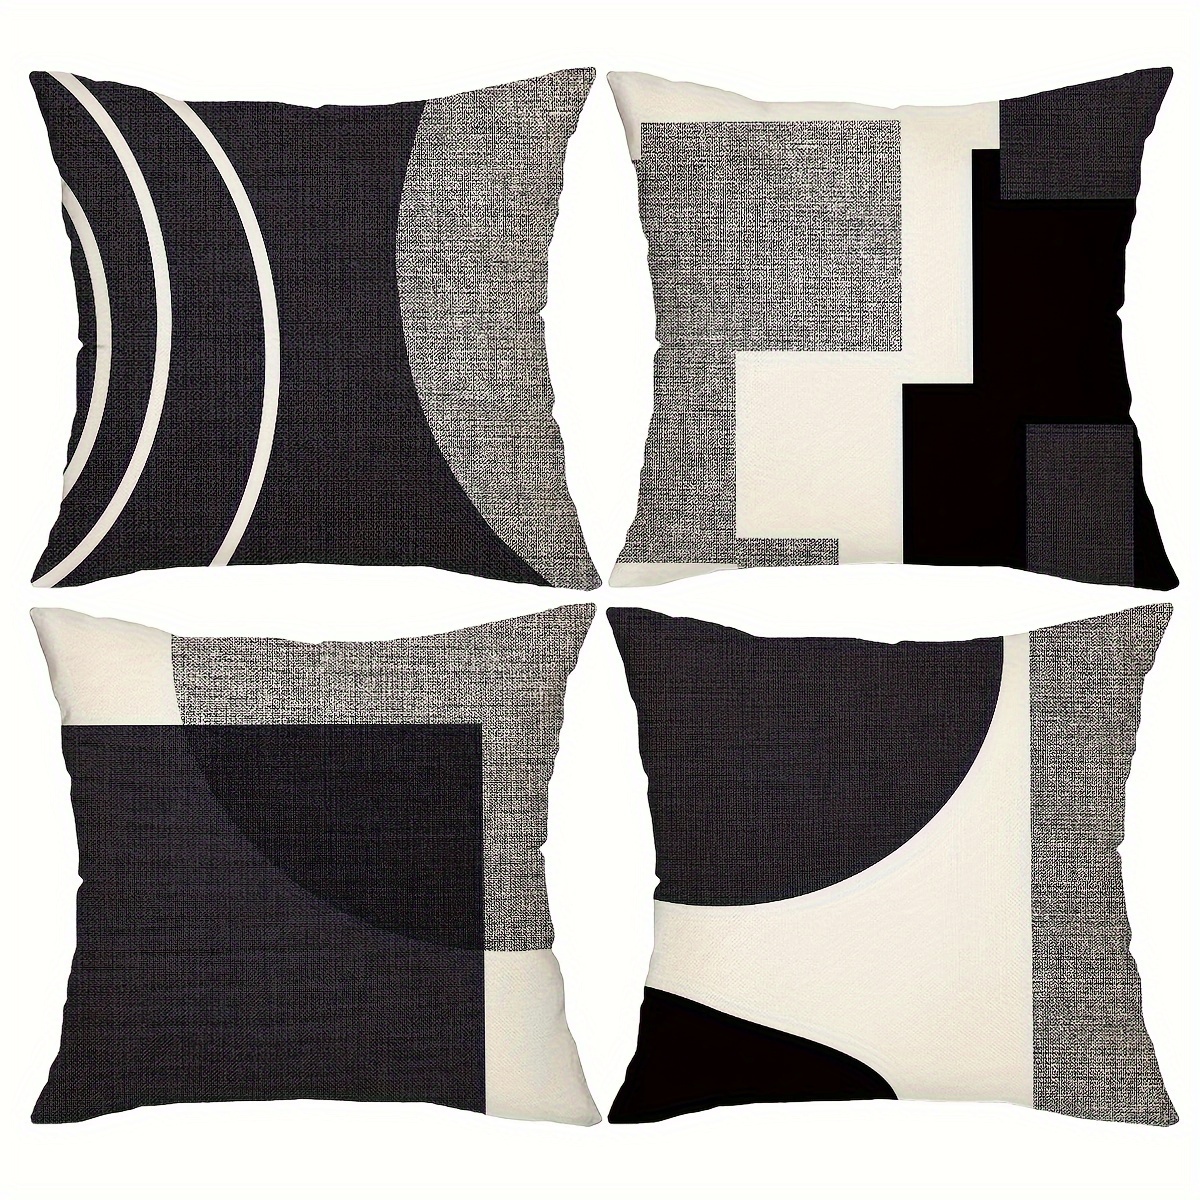 

4pcs/set, Black And White Decorative Pillow Covers Gray Silver Boho Throw Pillows For Couch Abstract Geometric Modern Pillowcases 18x18 Inches For Bed Bedroom